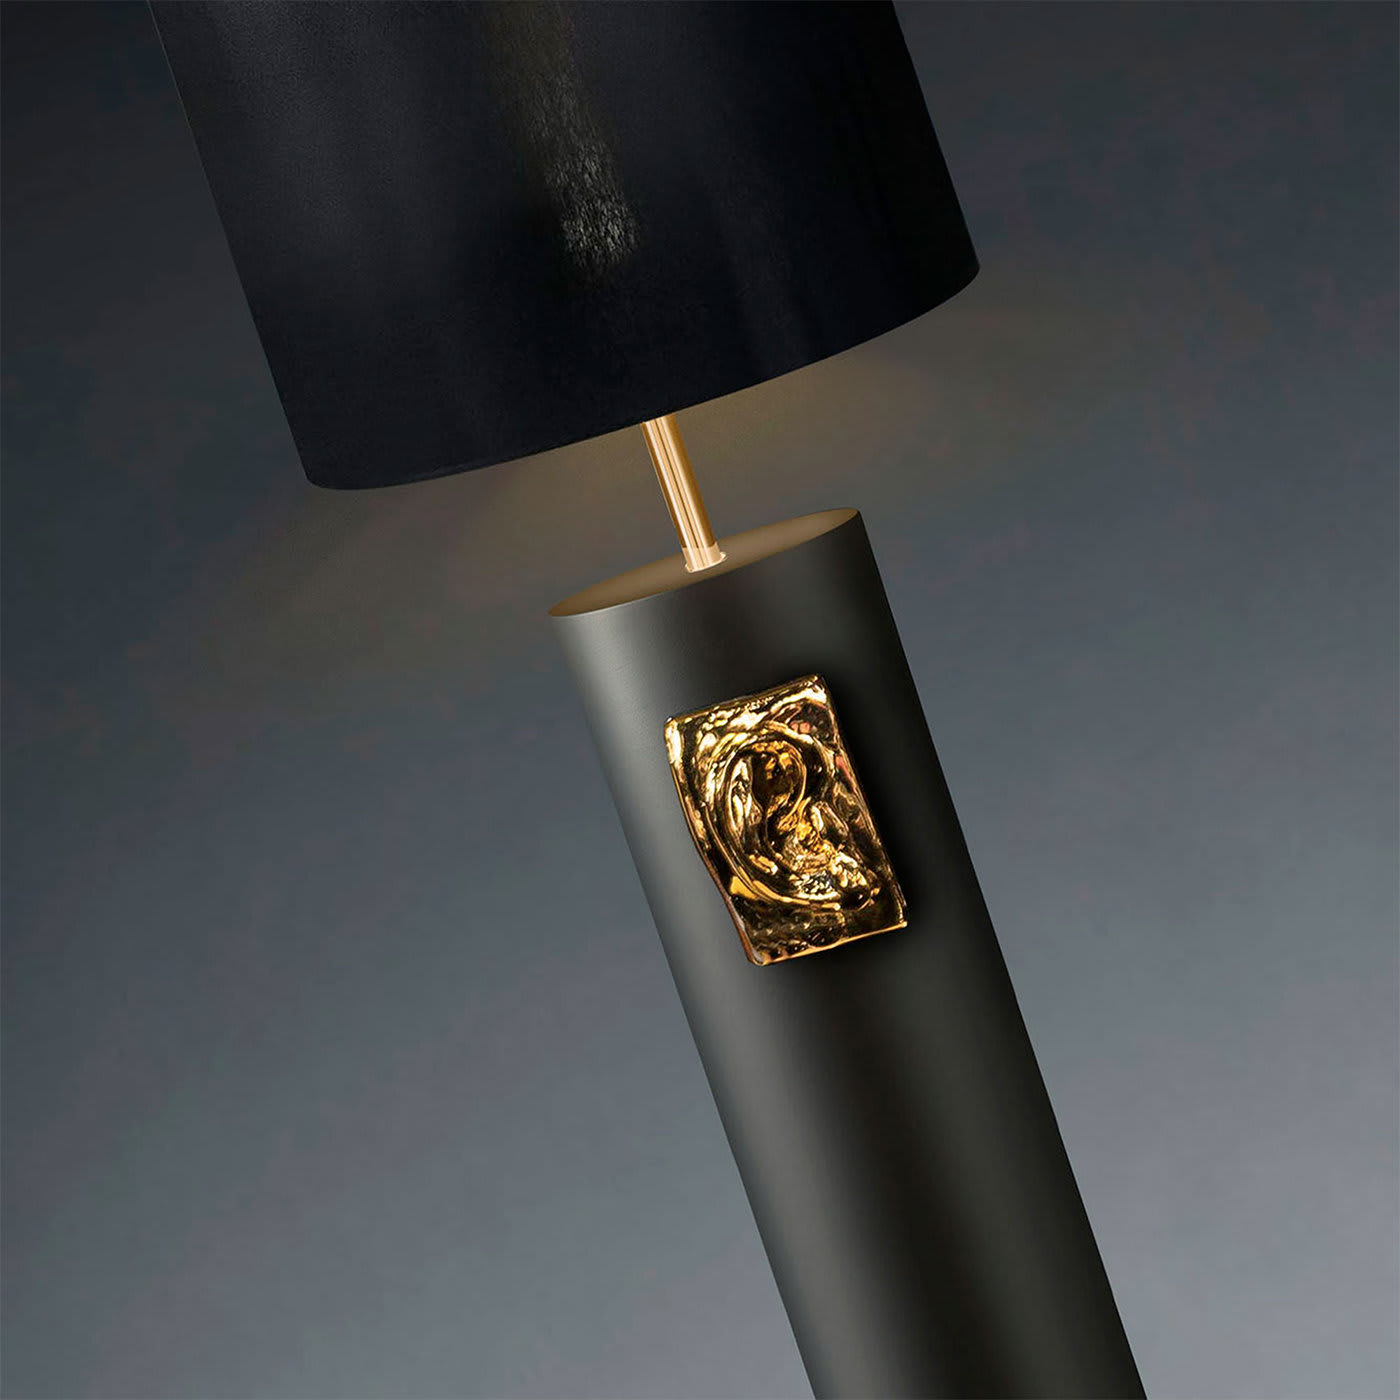 David Ear Floor and Table Ceramic Lamp - VGnewtrend